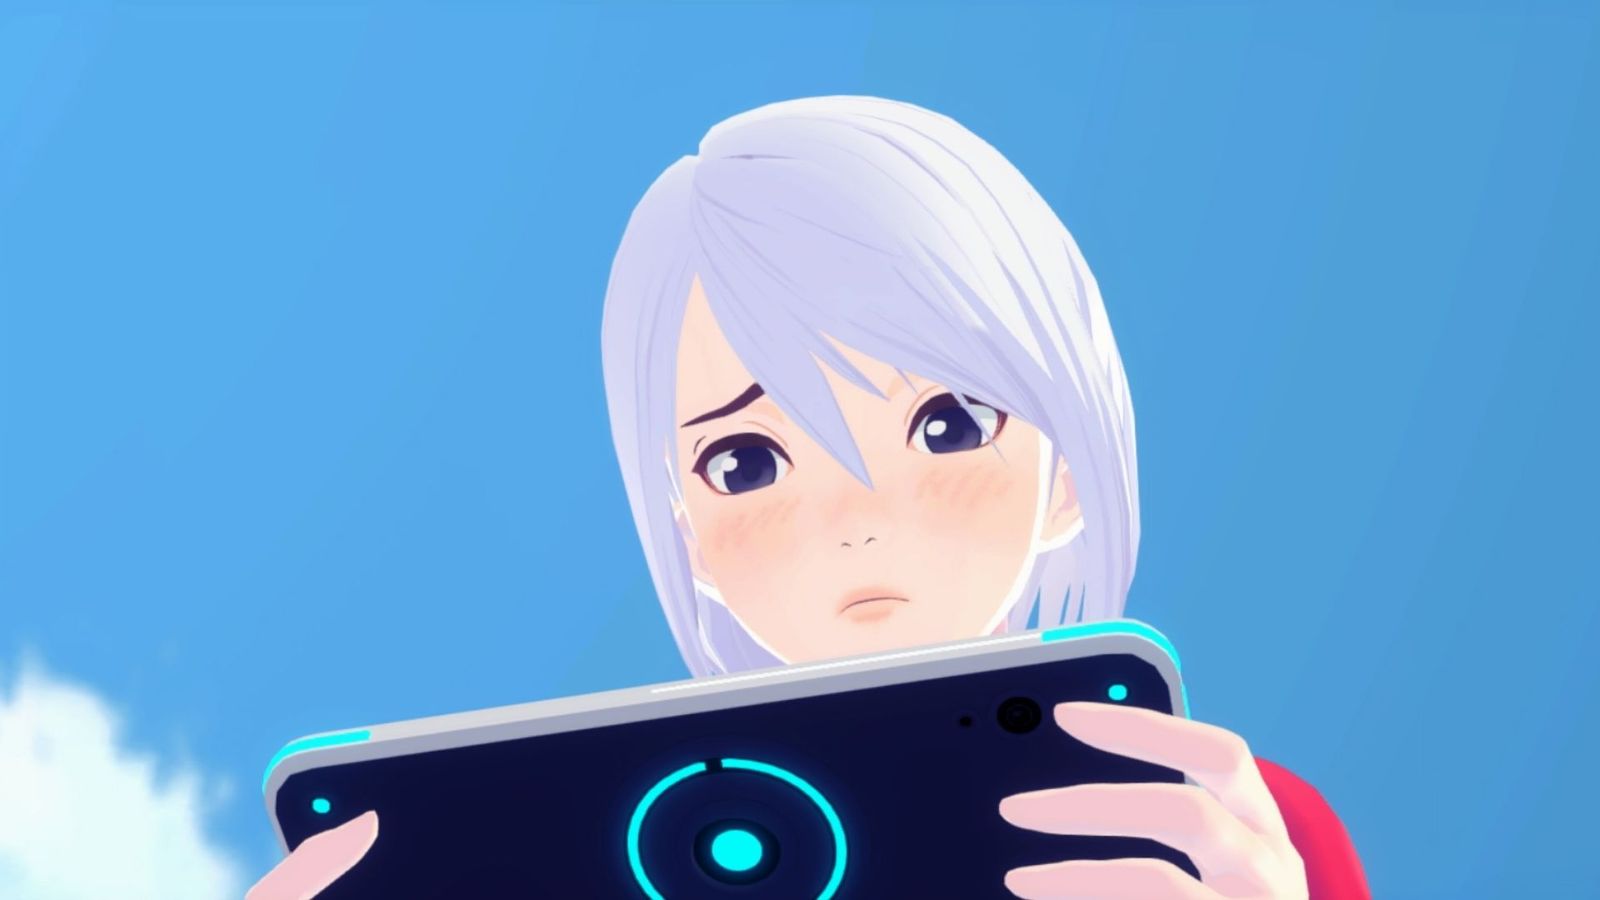 Another Code Recollection Ashley holding game console that resembles the Nintendo Switch